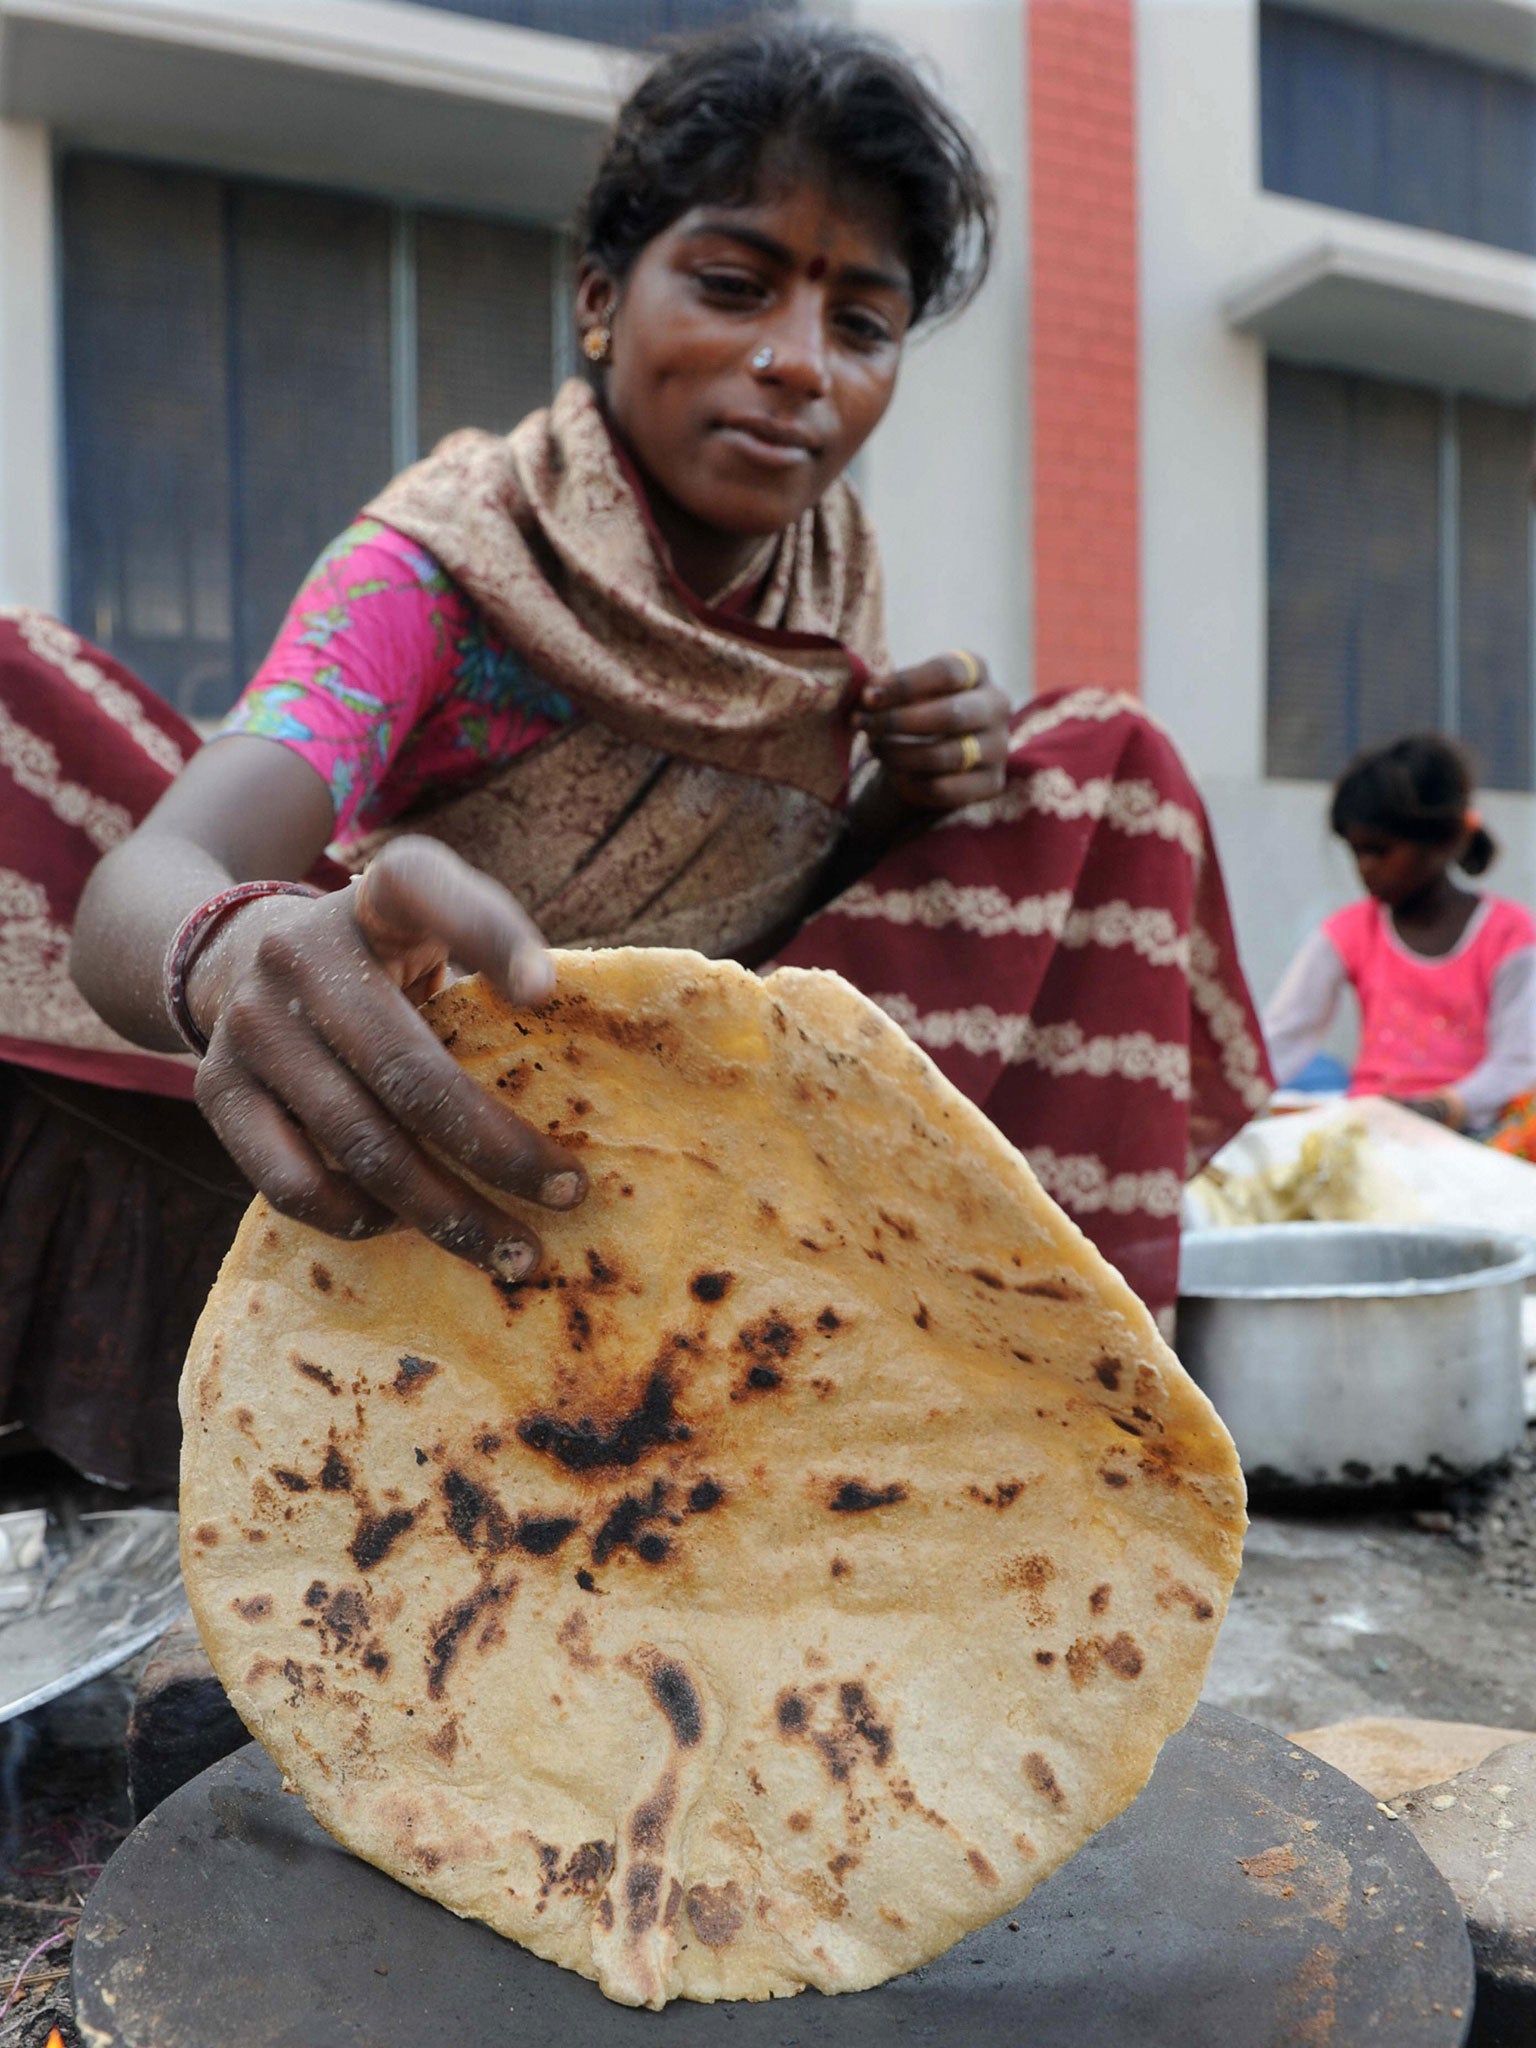 The Indian government has passed a scheme to provide cheap food to more than 800m people